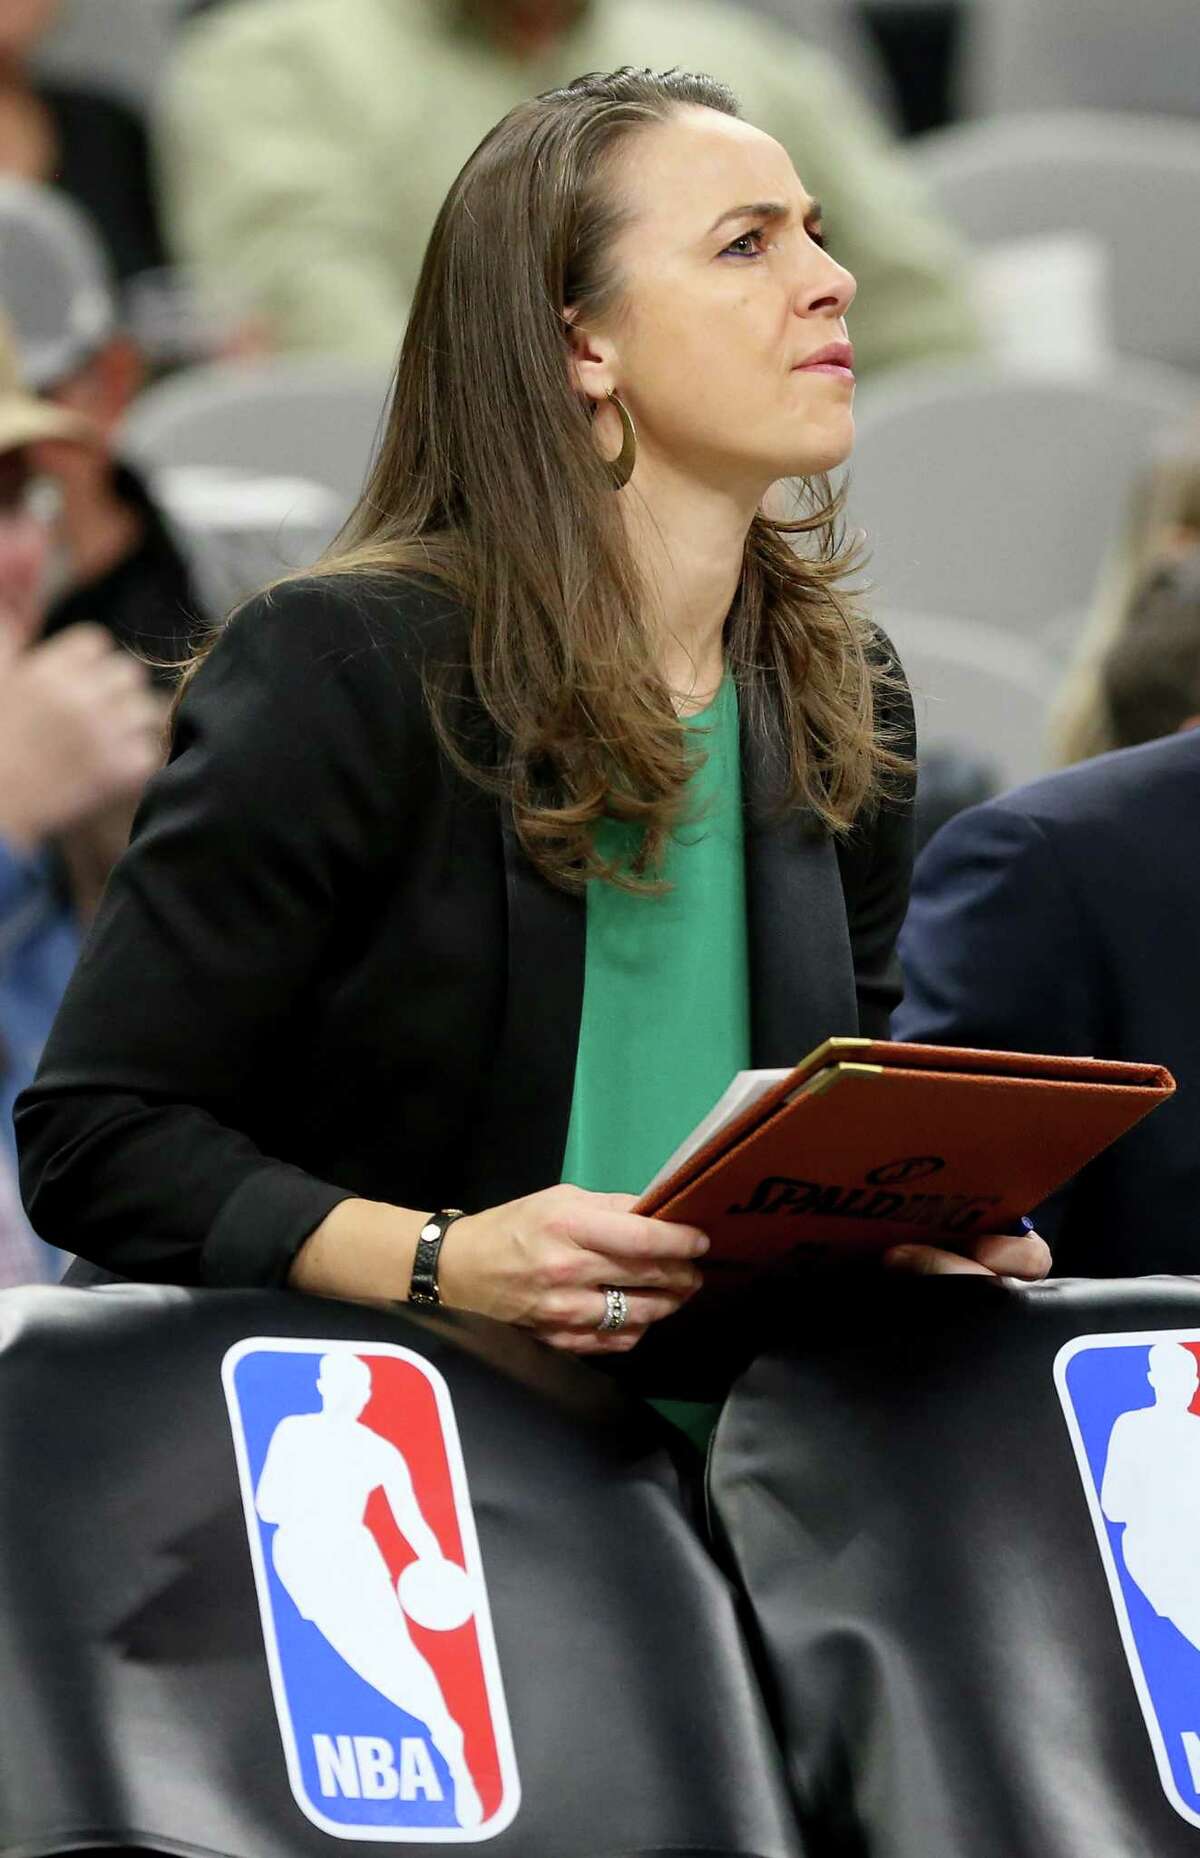 San Antonio Spurs assistant coach Becky Hammon pauses during a first half timeout against the Dallas Mavericks Sunday Jan. 29, 2017 at the AT&T Center.